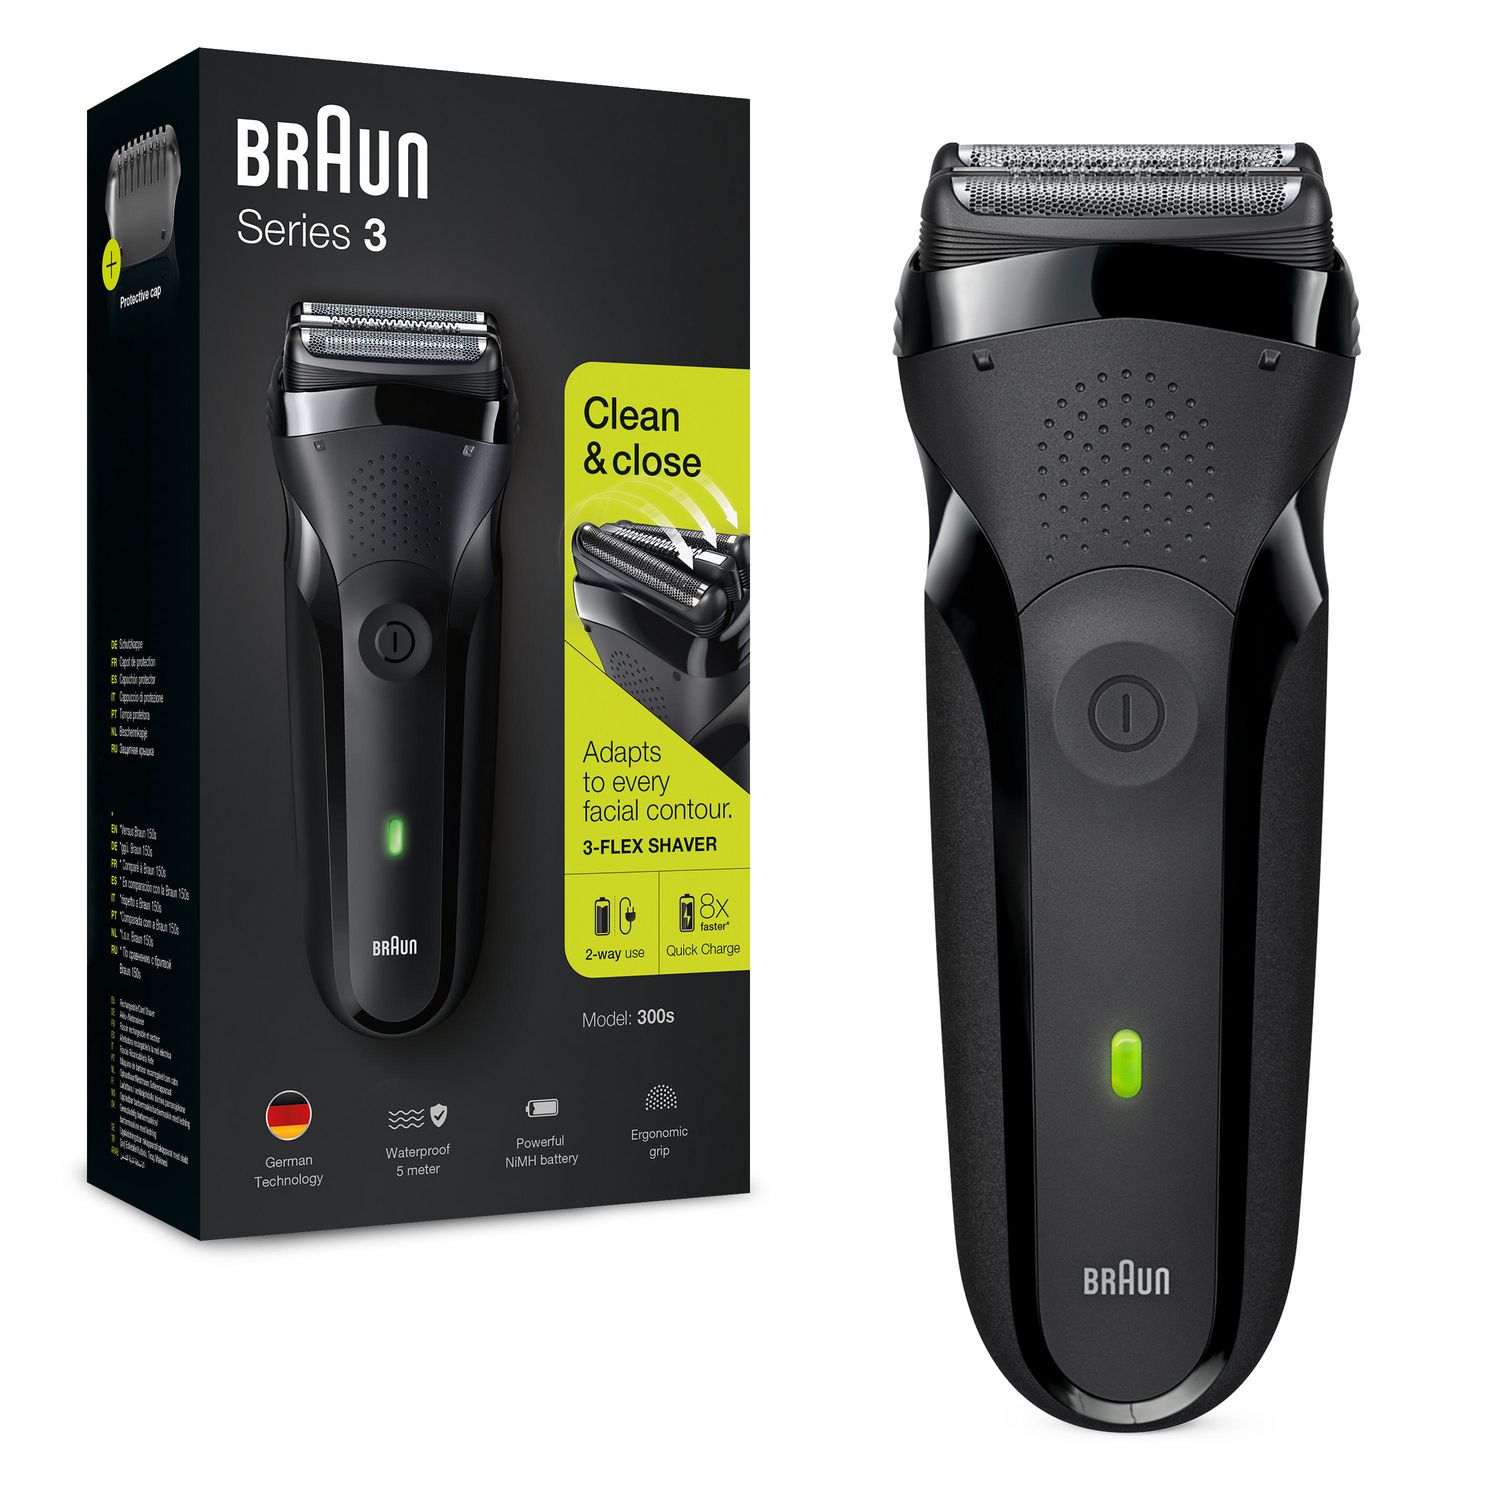 CT 1 Shaver, Electric 3 black, 300s Rechargeable Braun Series